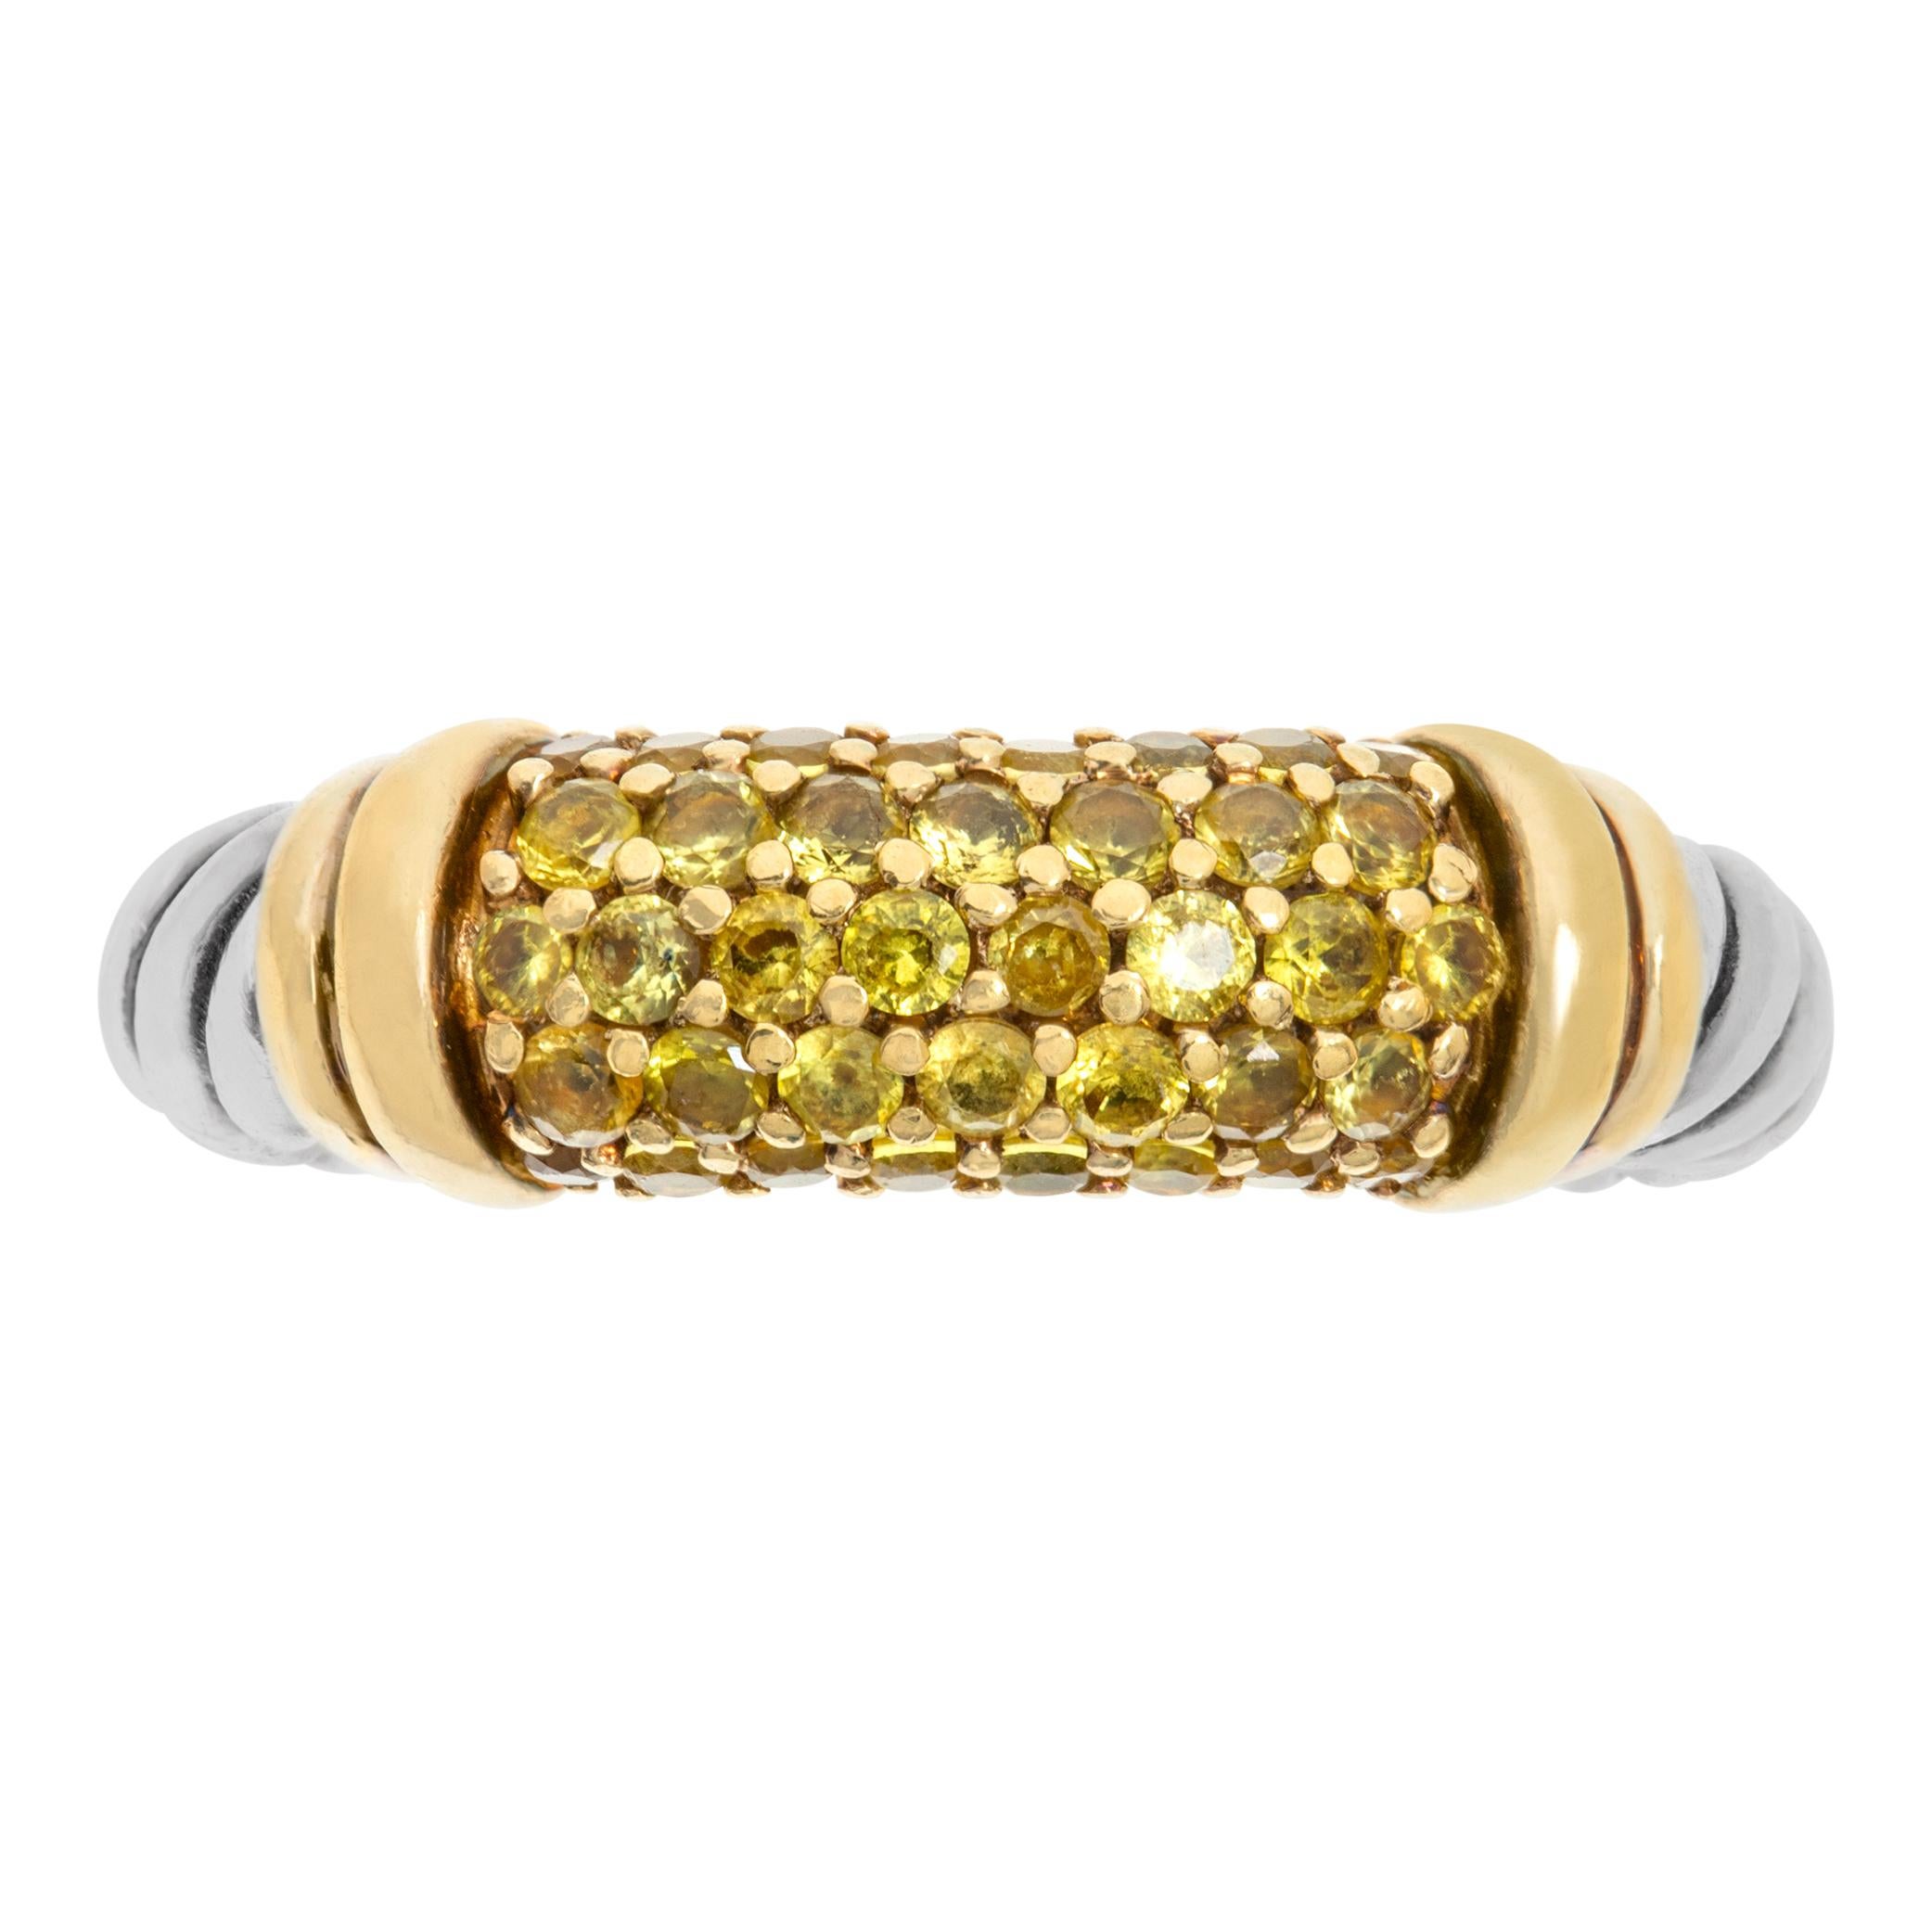 David Yurman pave yellow sapphire ring in 18k yellow gold and sterling silver. Size 6.

This David Yurman ring is currently size 6 and some items can be sized up or down, please ask! It weighs 3.1 pennyweights and is 18K & STERLING SILVER.